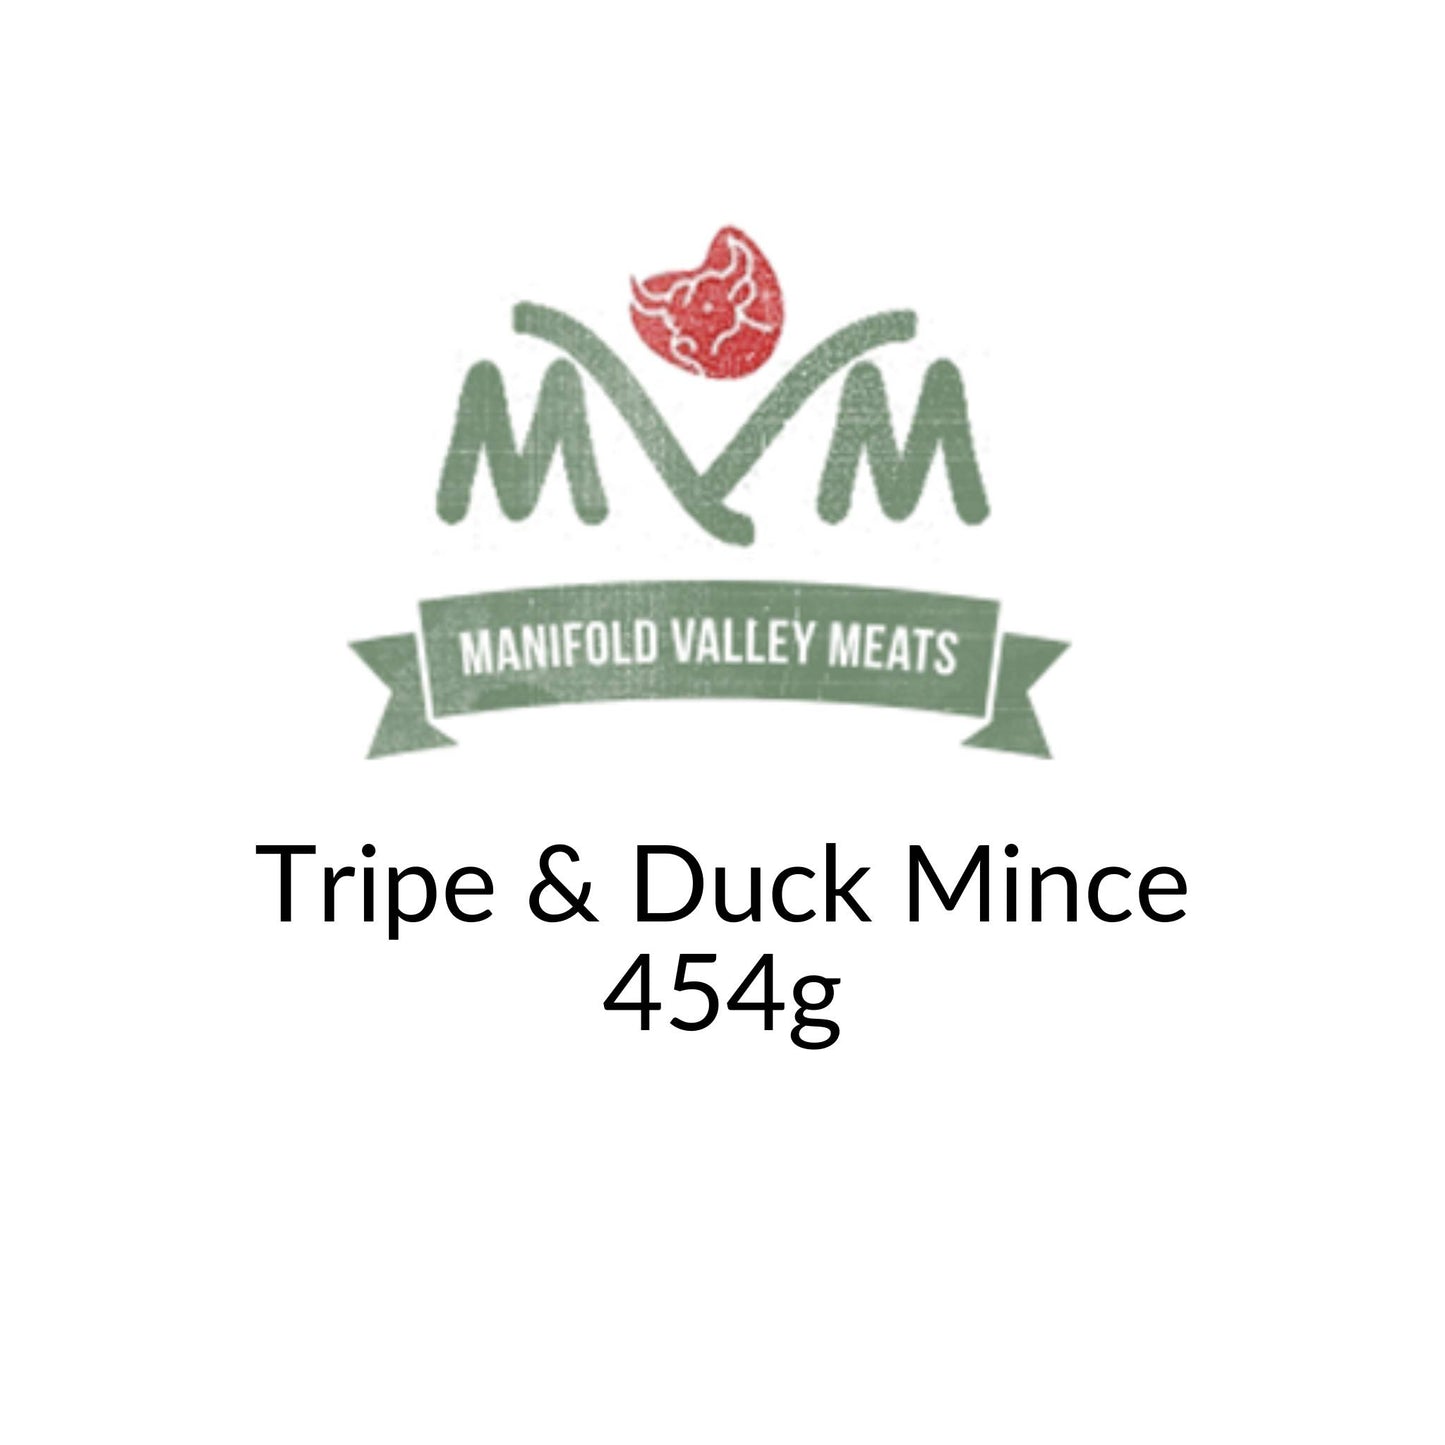 Manifold Valley Meats Tripe and Duck Mince Raw Dog Food